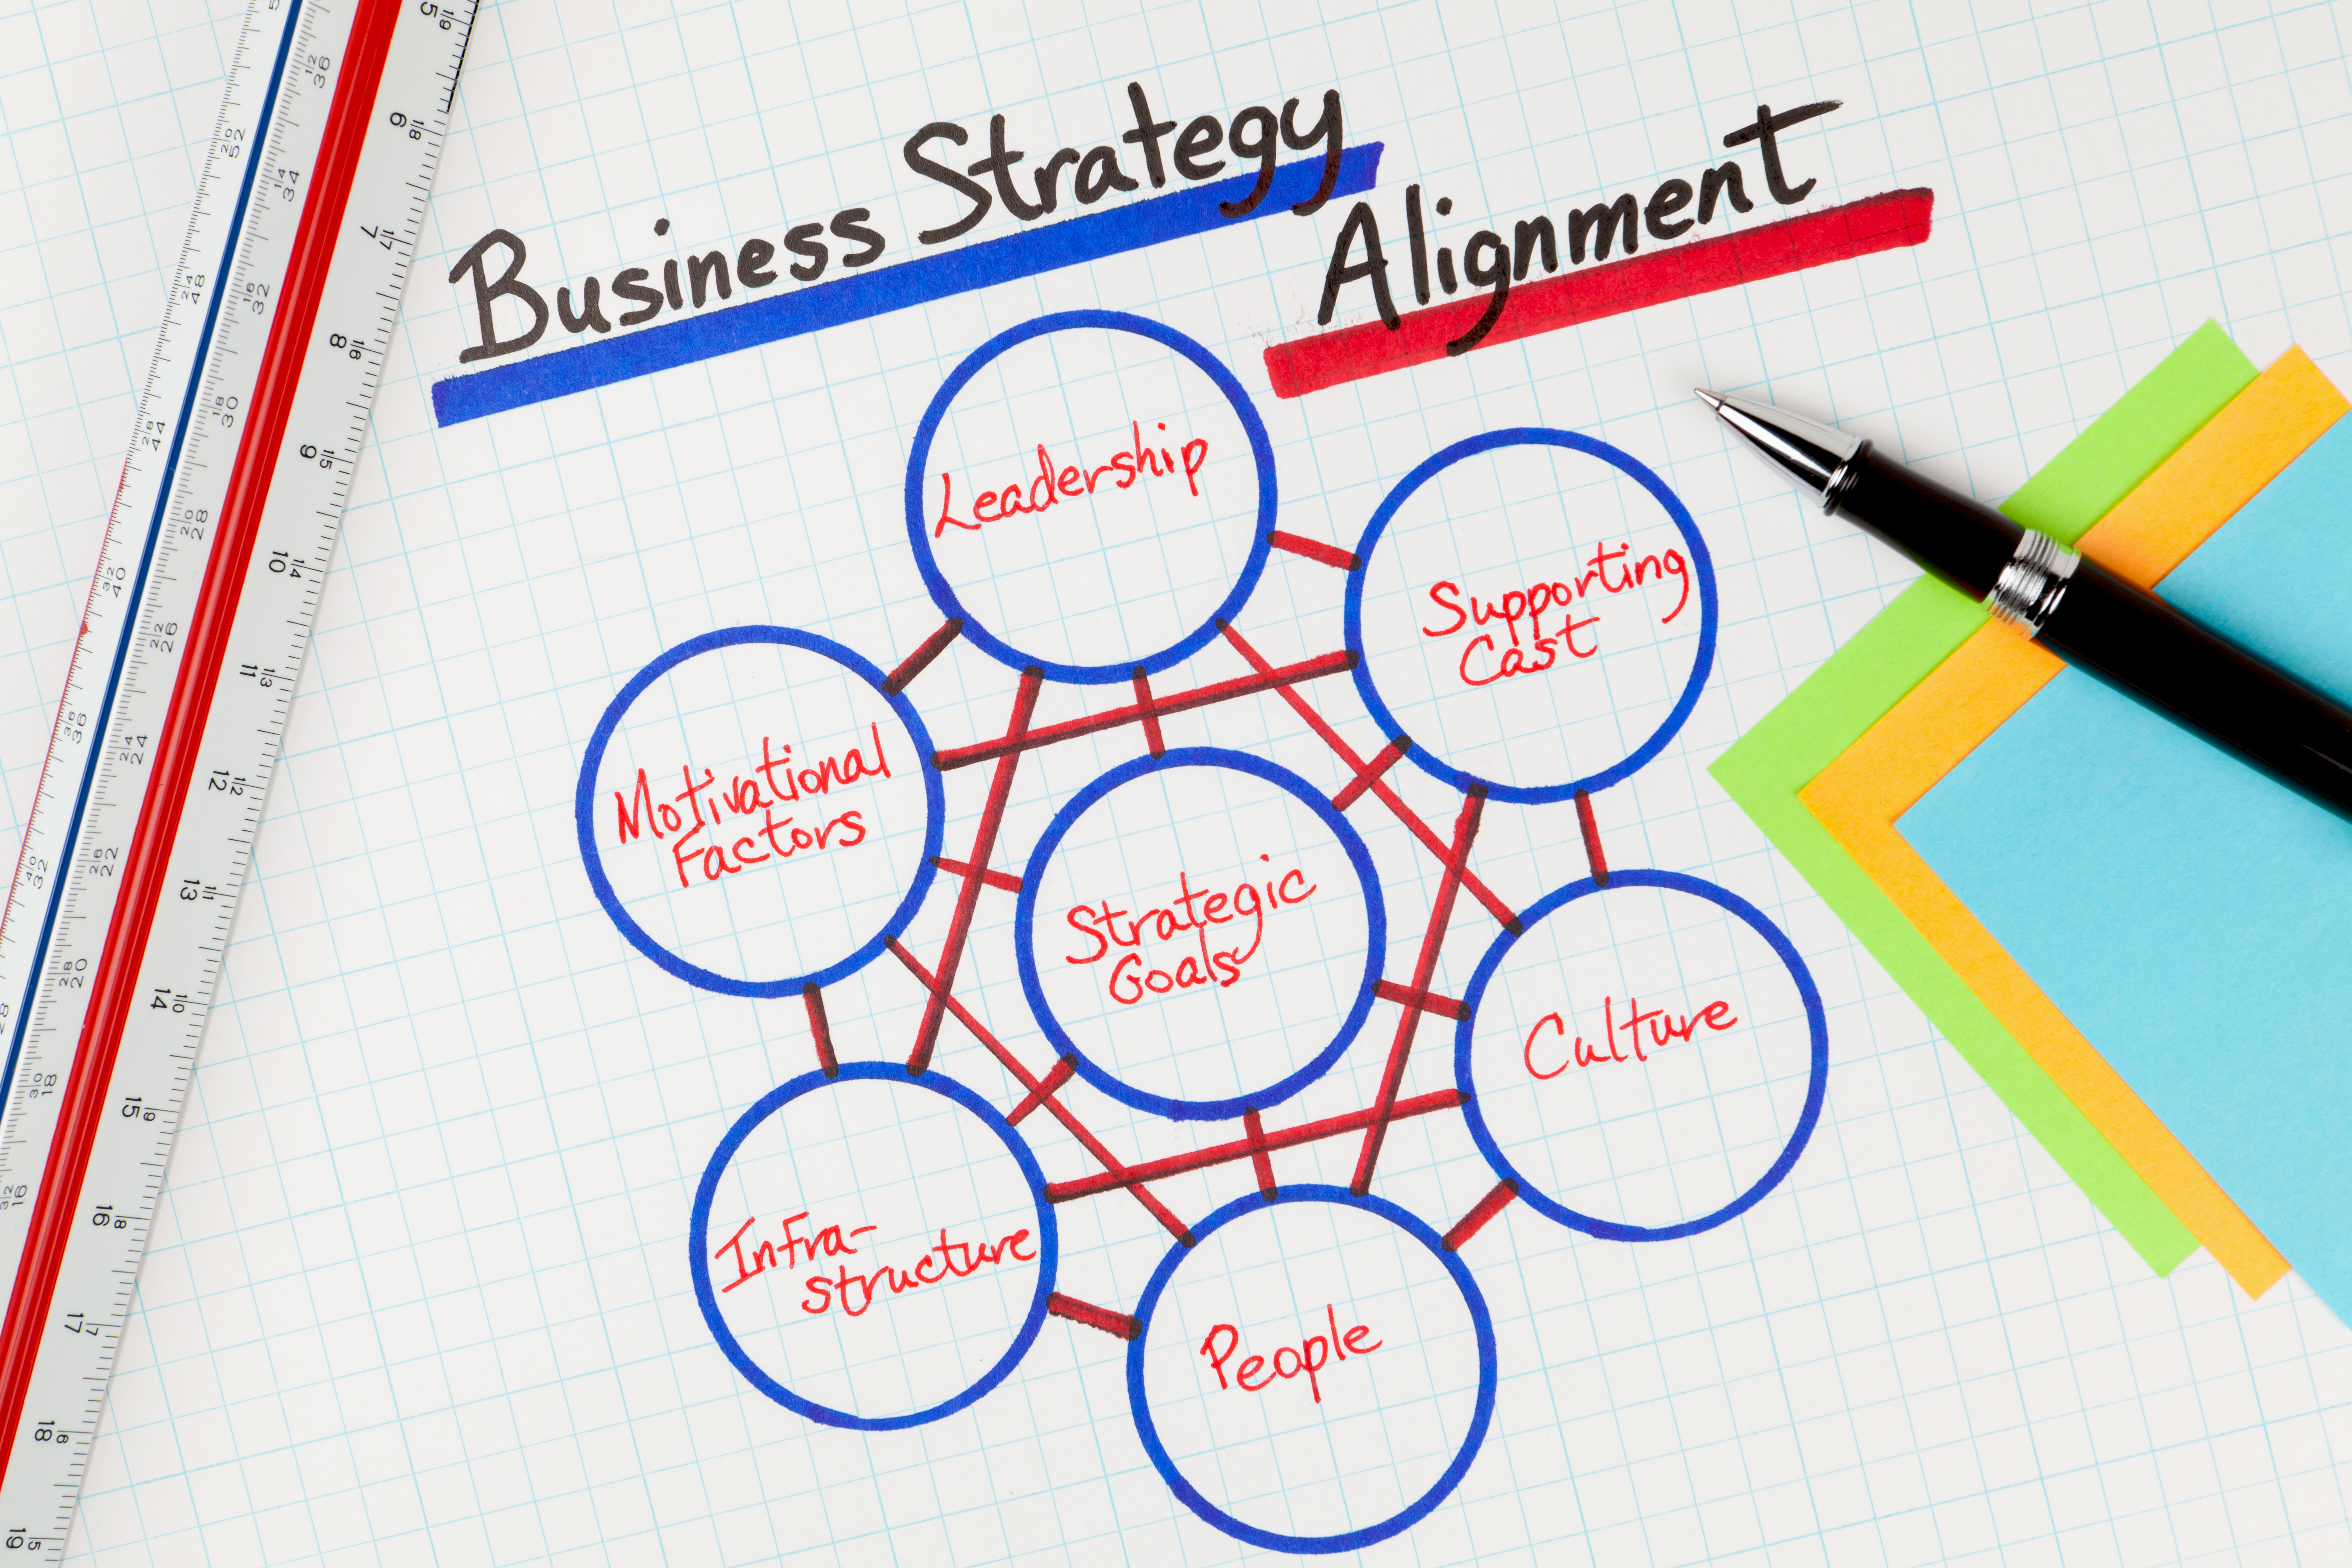 Business alignment, business strategy, business planning, strategic planning